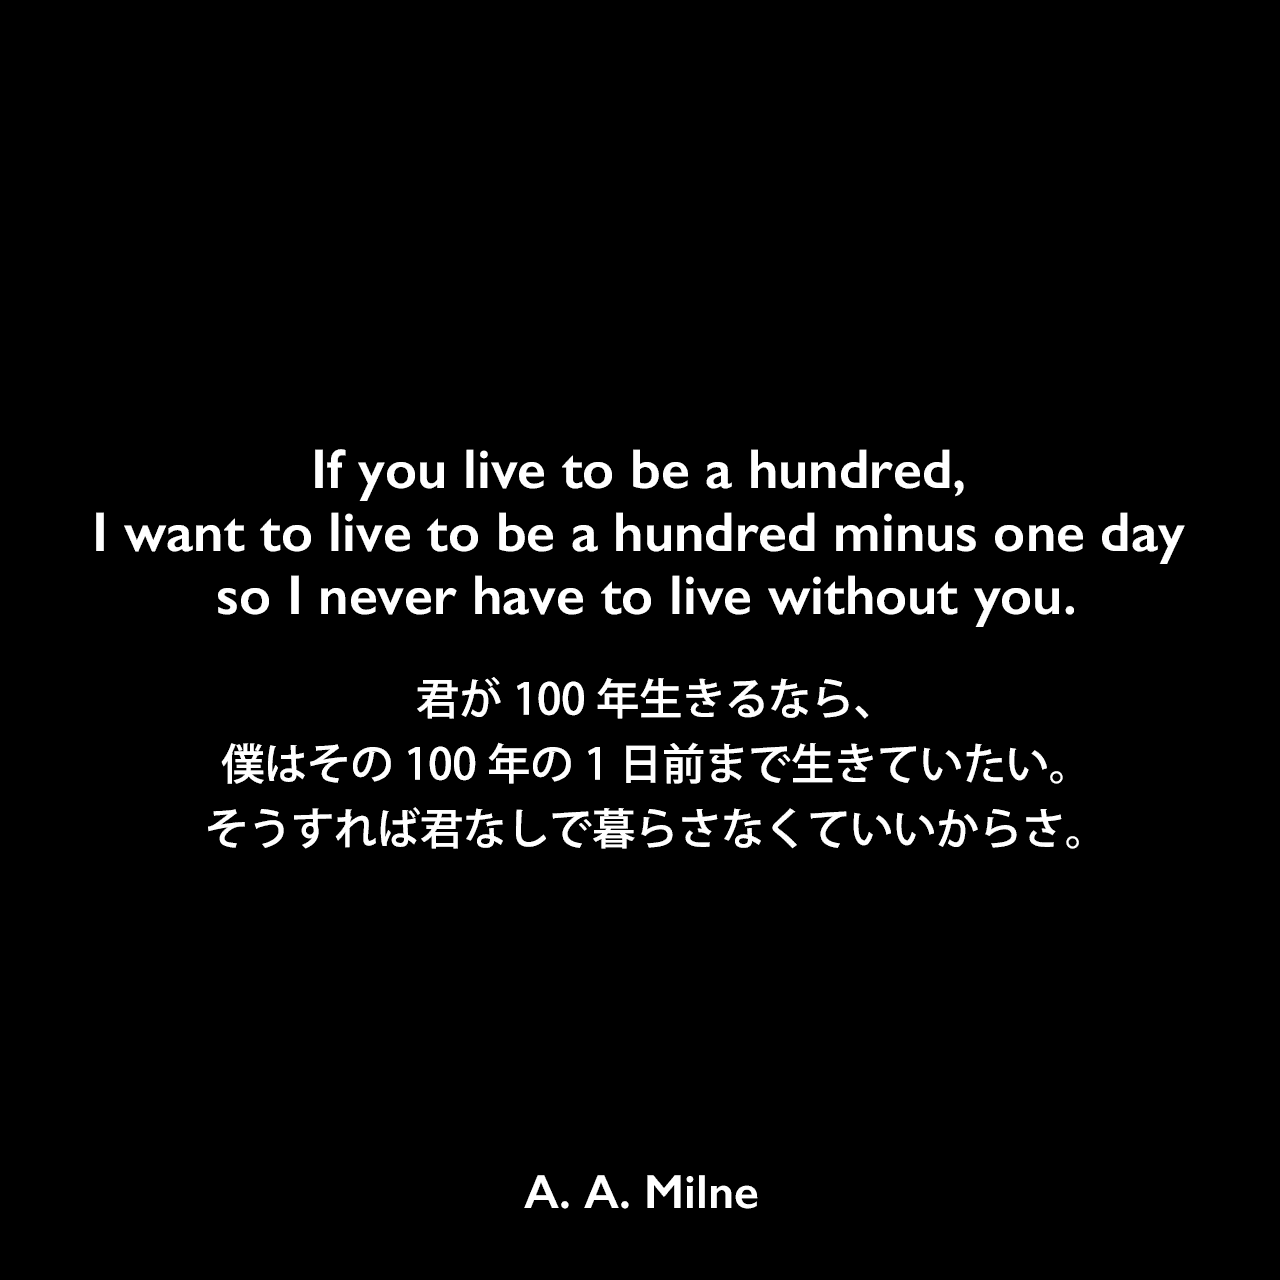 If you live to be a hundred, I want to live to be a hundred minus one day so I never have to live without you.君が100年生きるなら、僕はその100年の1日前まで生きていたい。そうすれば君なしで暮らさなくていいからさ。A. A. Milne